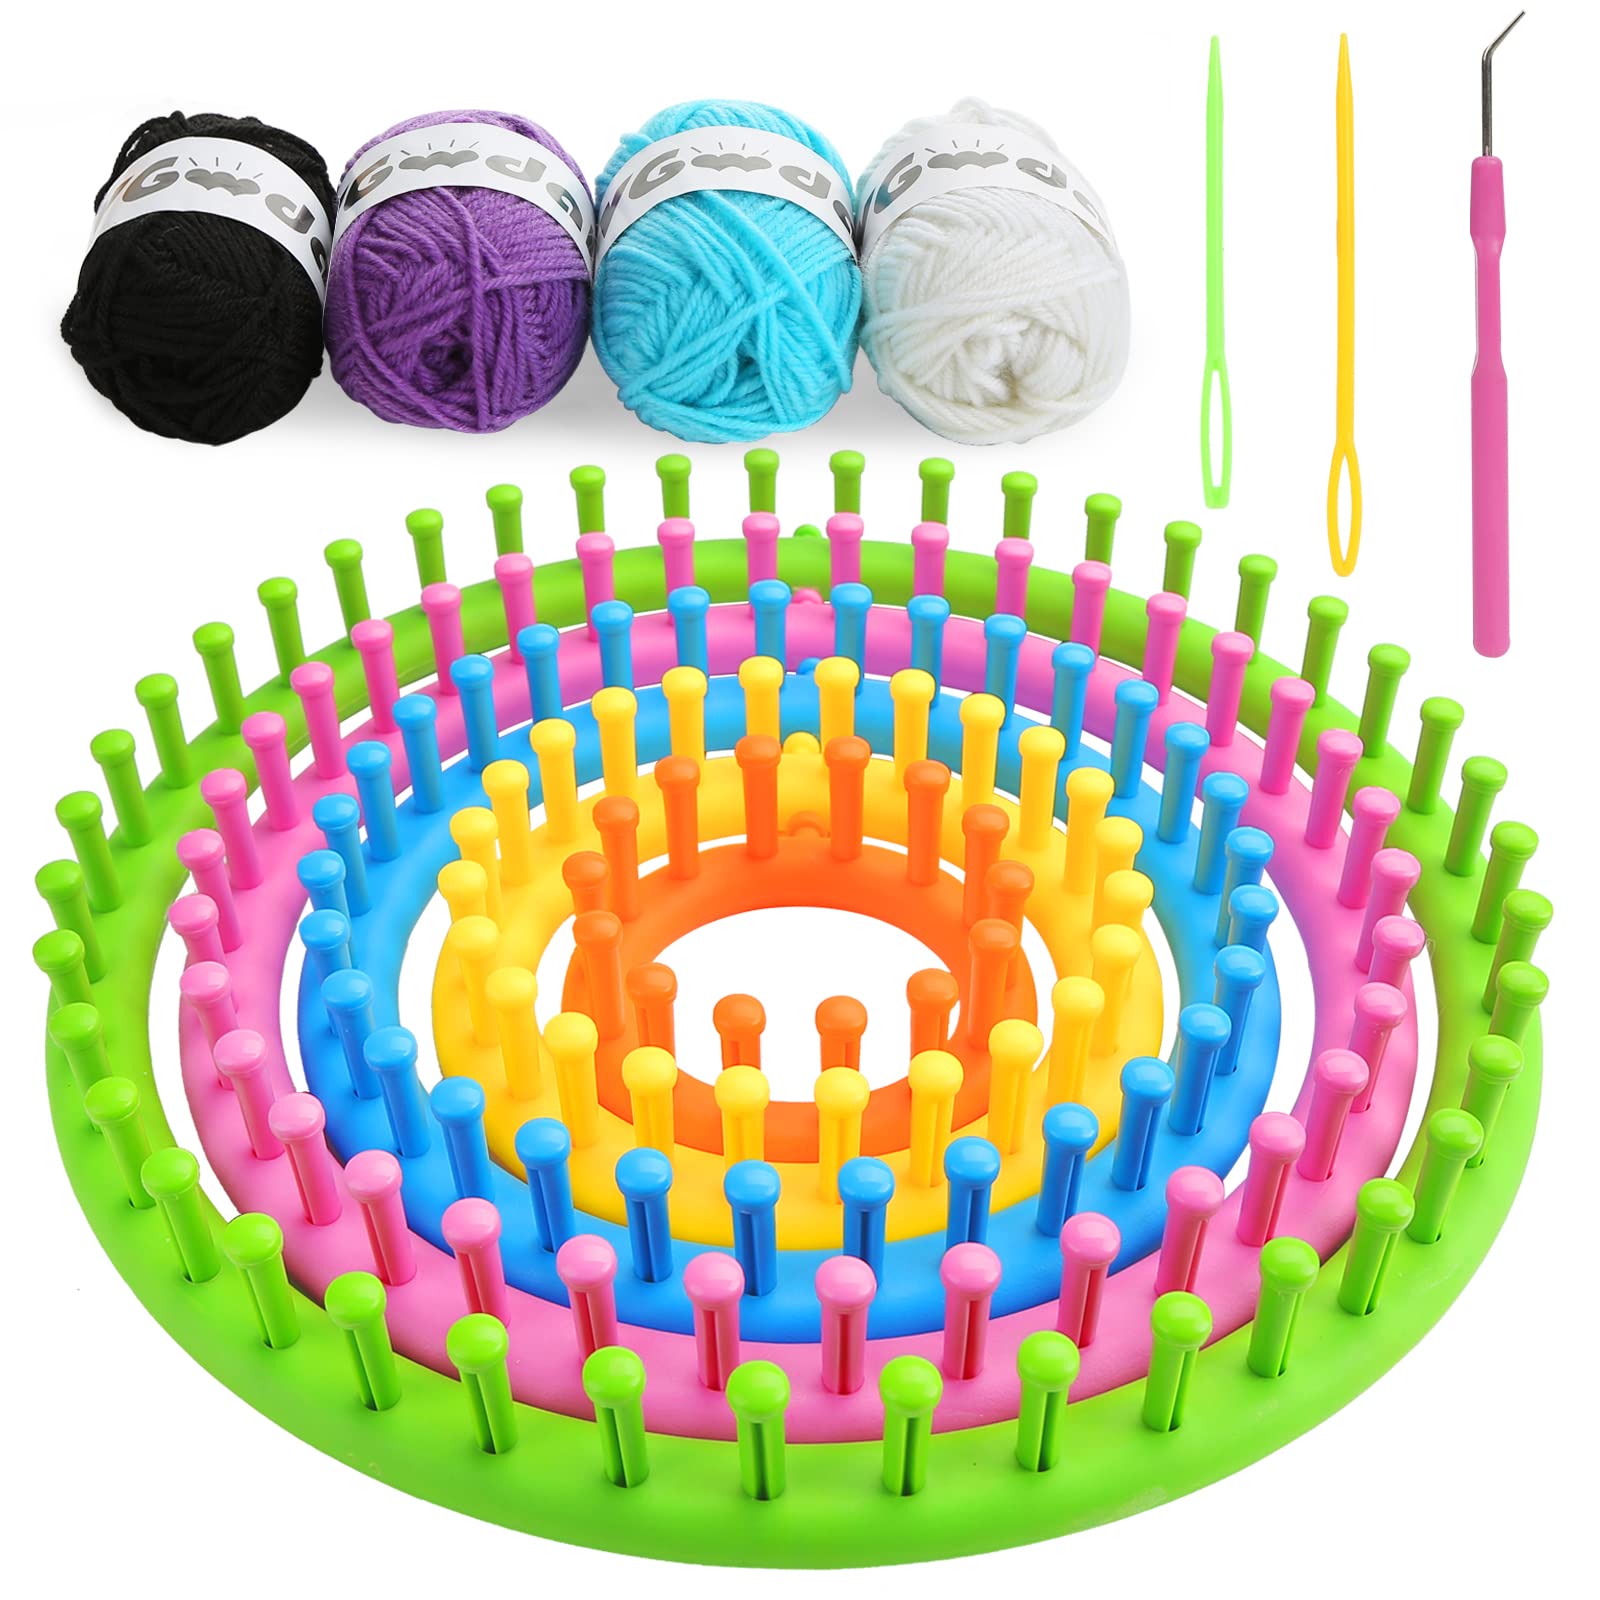  VGOODALL 18PCS Knitting Loom Set, Round Knitting Looms  Rectangle Knitting Looms Pompom Maker with Yarn Skeins Acrylic Knitting  Crochet Supplies for Hat Scarf Shawl Sweater Sock : Everything Else